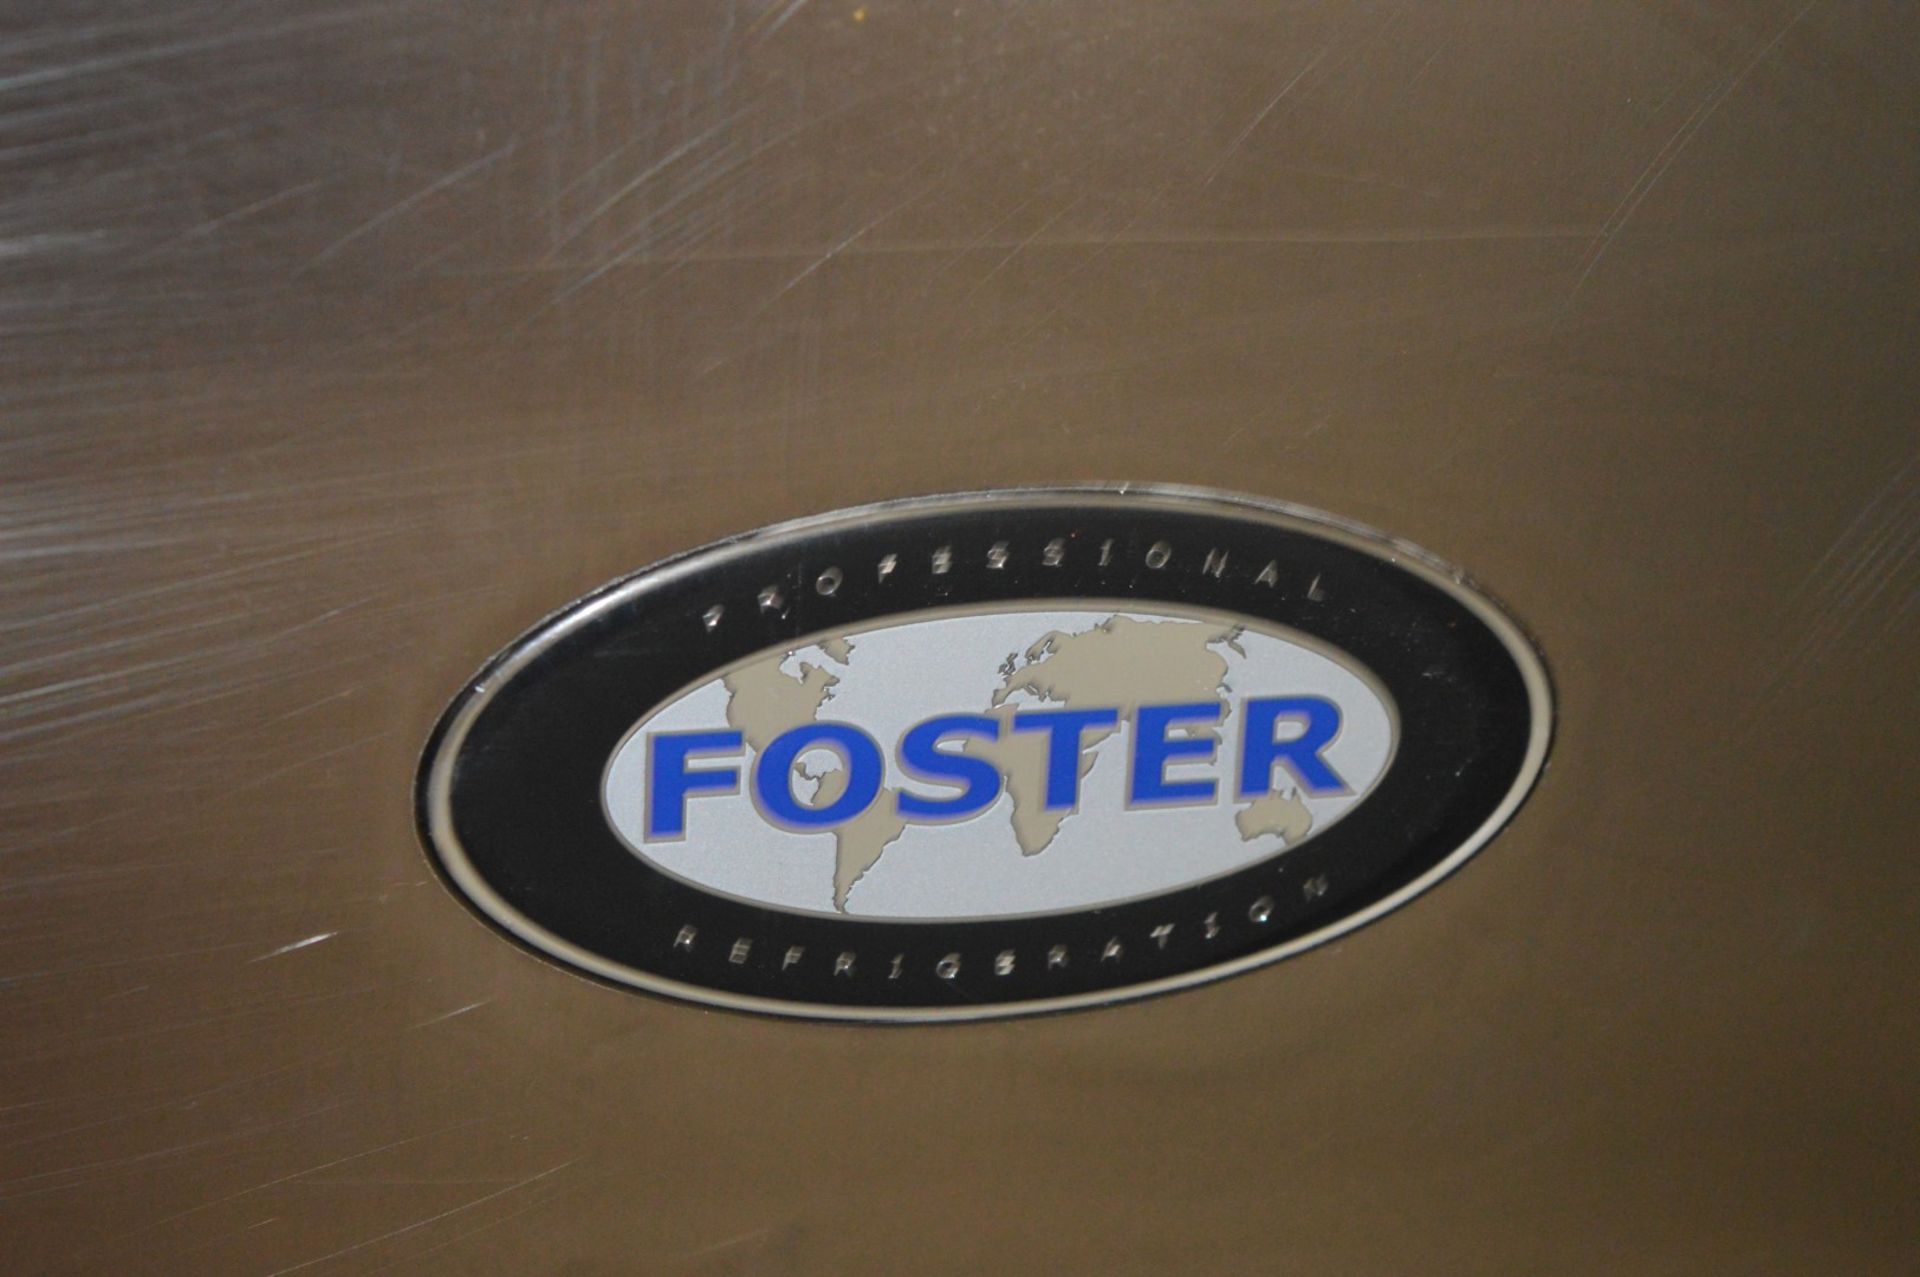 1 x Foster ProG1100L-A Gastro Pro 1100 Litre Stainless Steal Commercial Freezer - Aluminium Interior - Image 3 of 8